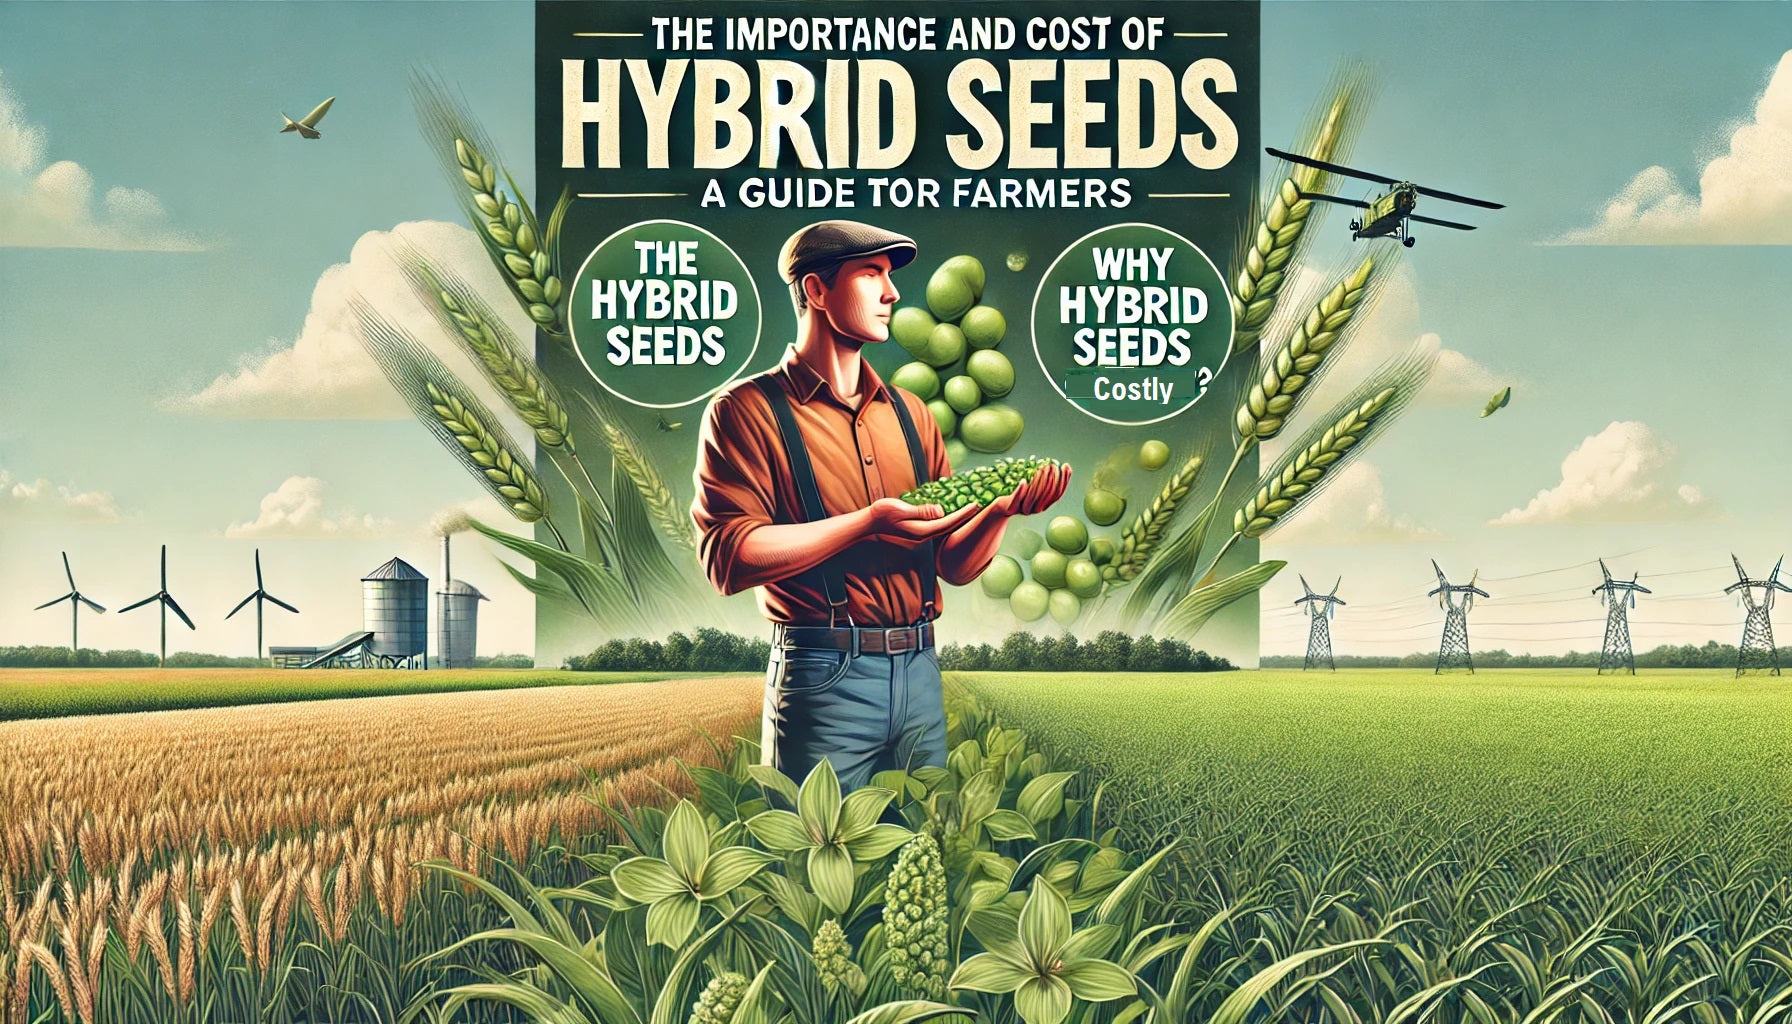 The Importance and Cost of Hybrid Seeds: A Guide for Farmers